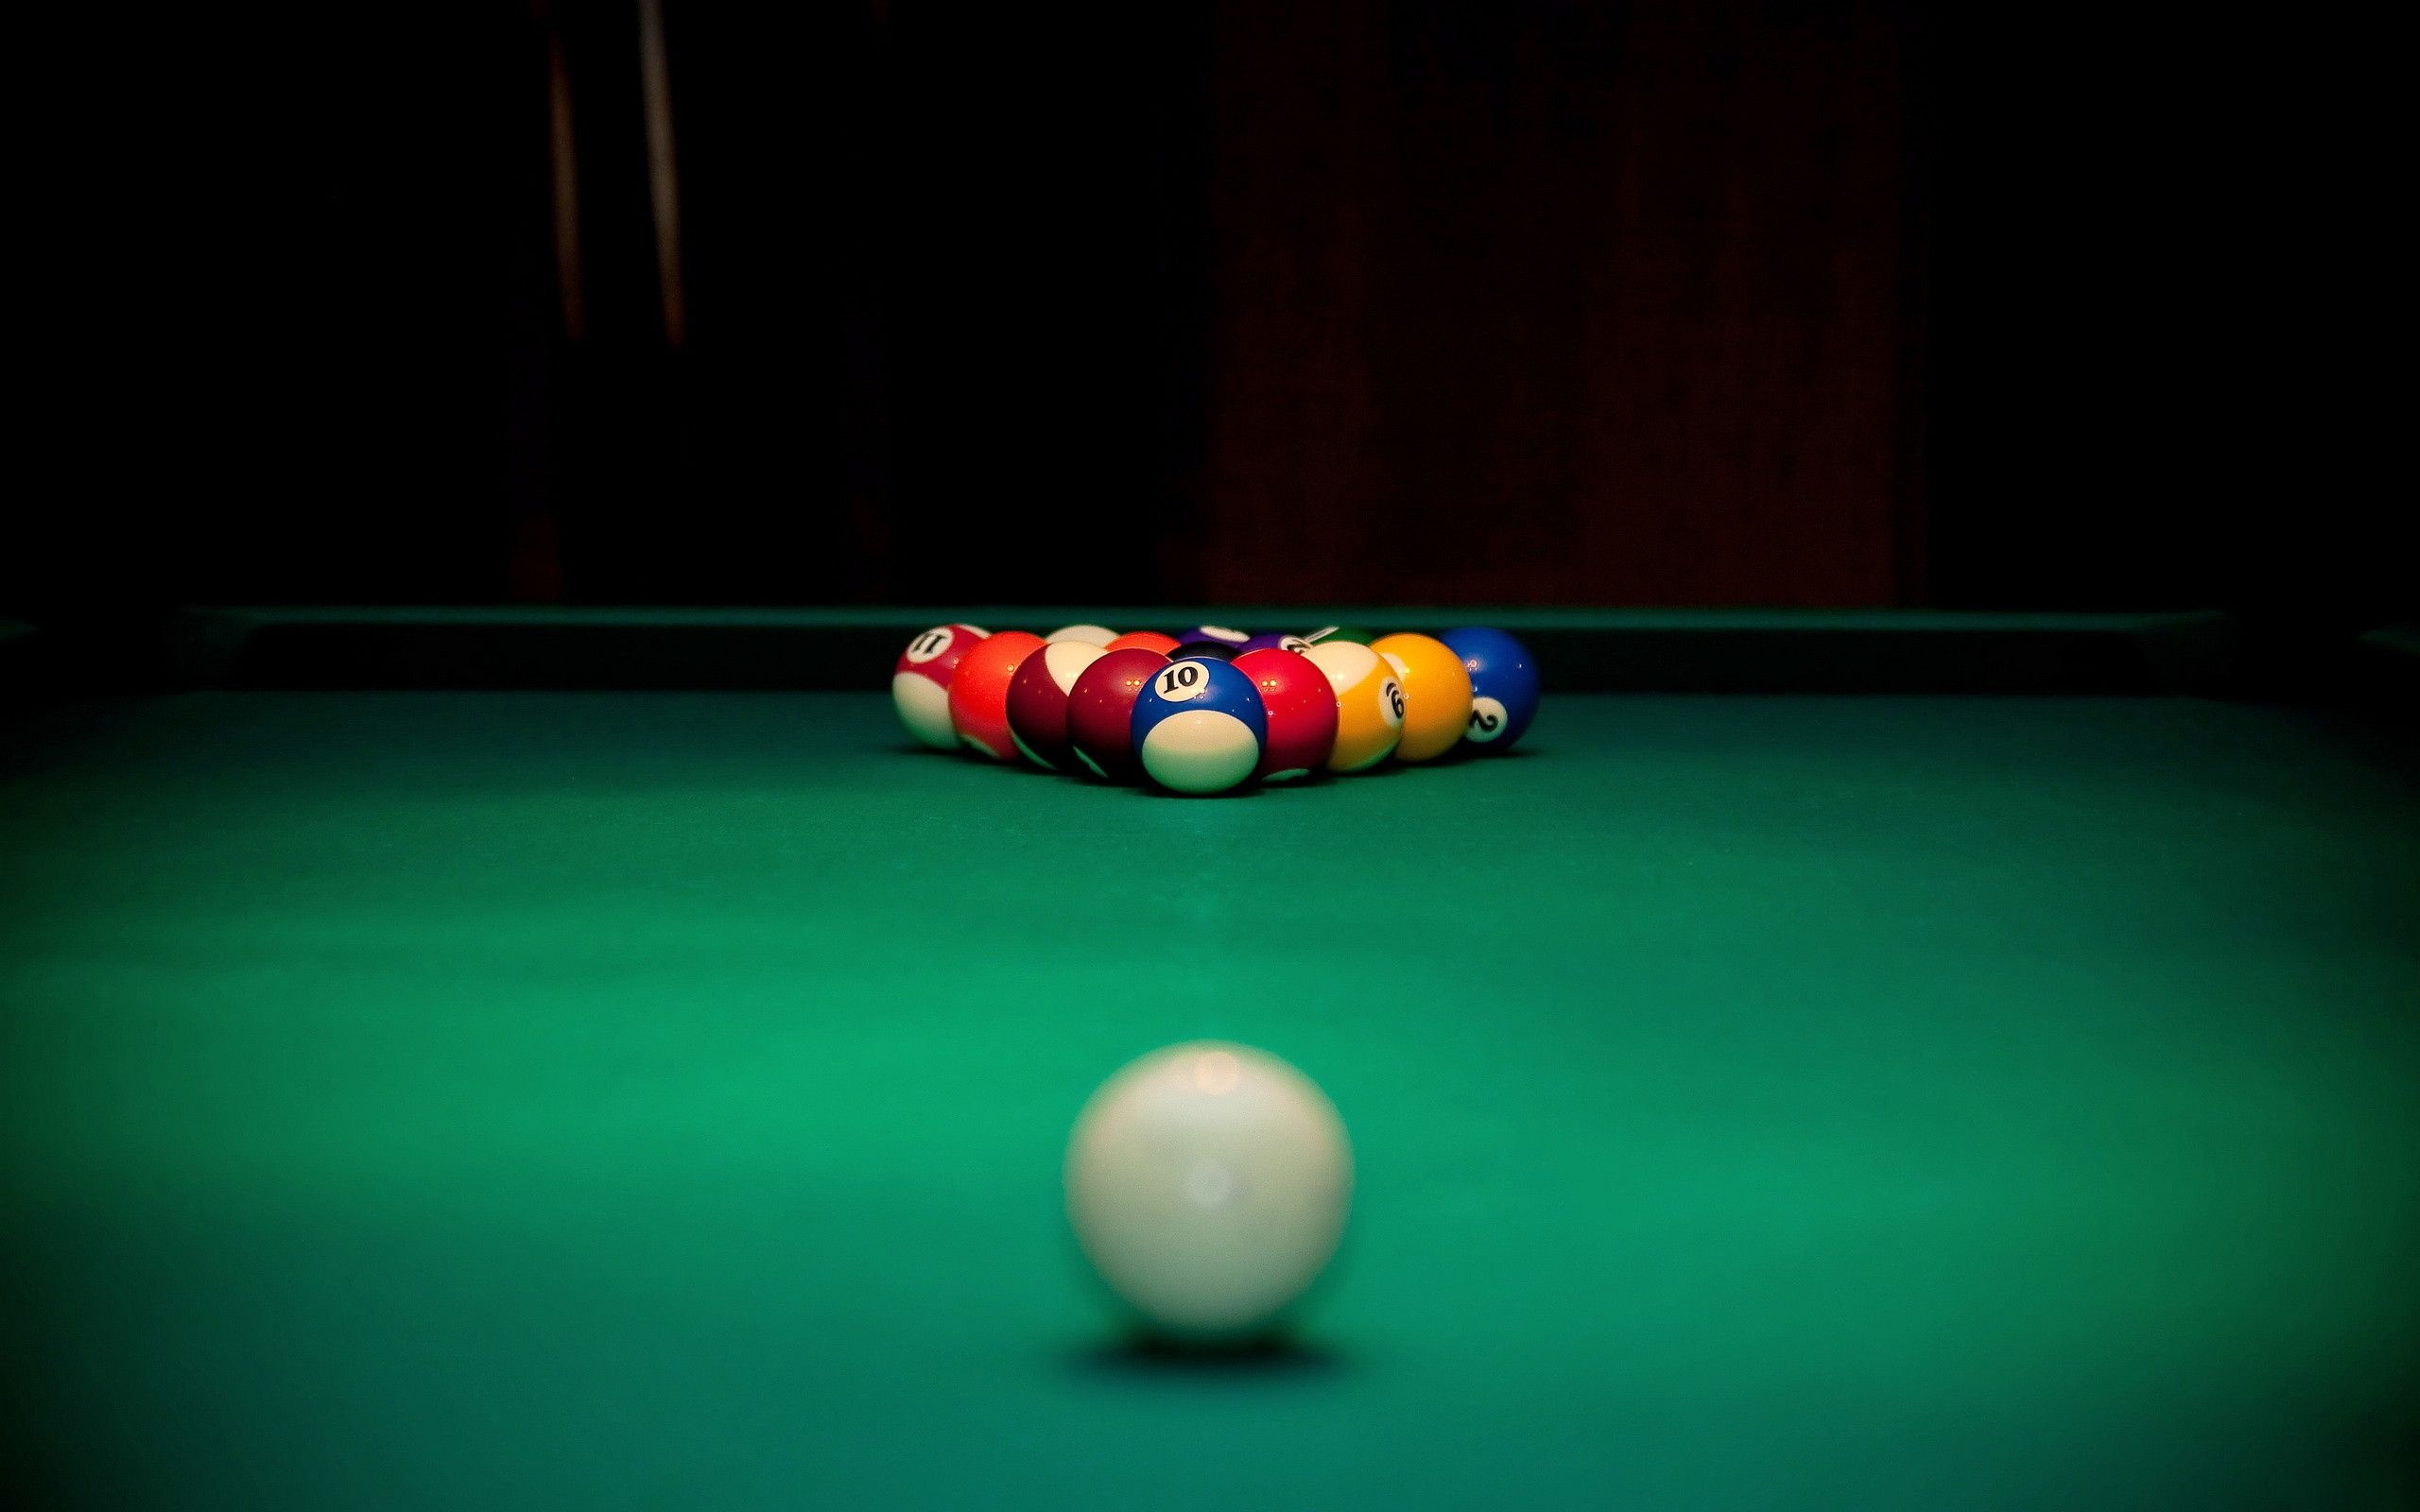 Pool (Cue Sports): Eight-ball, The most popular type of recreational game with cue sticks. 2560x1600 HD Background.